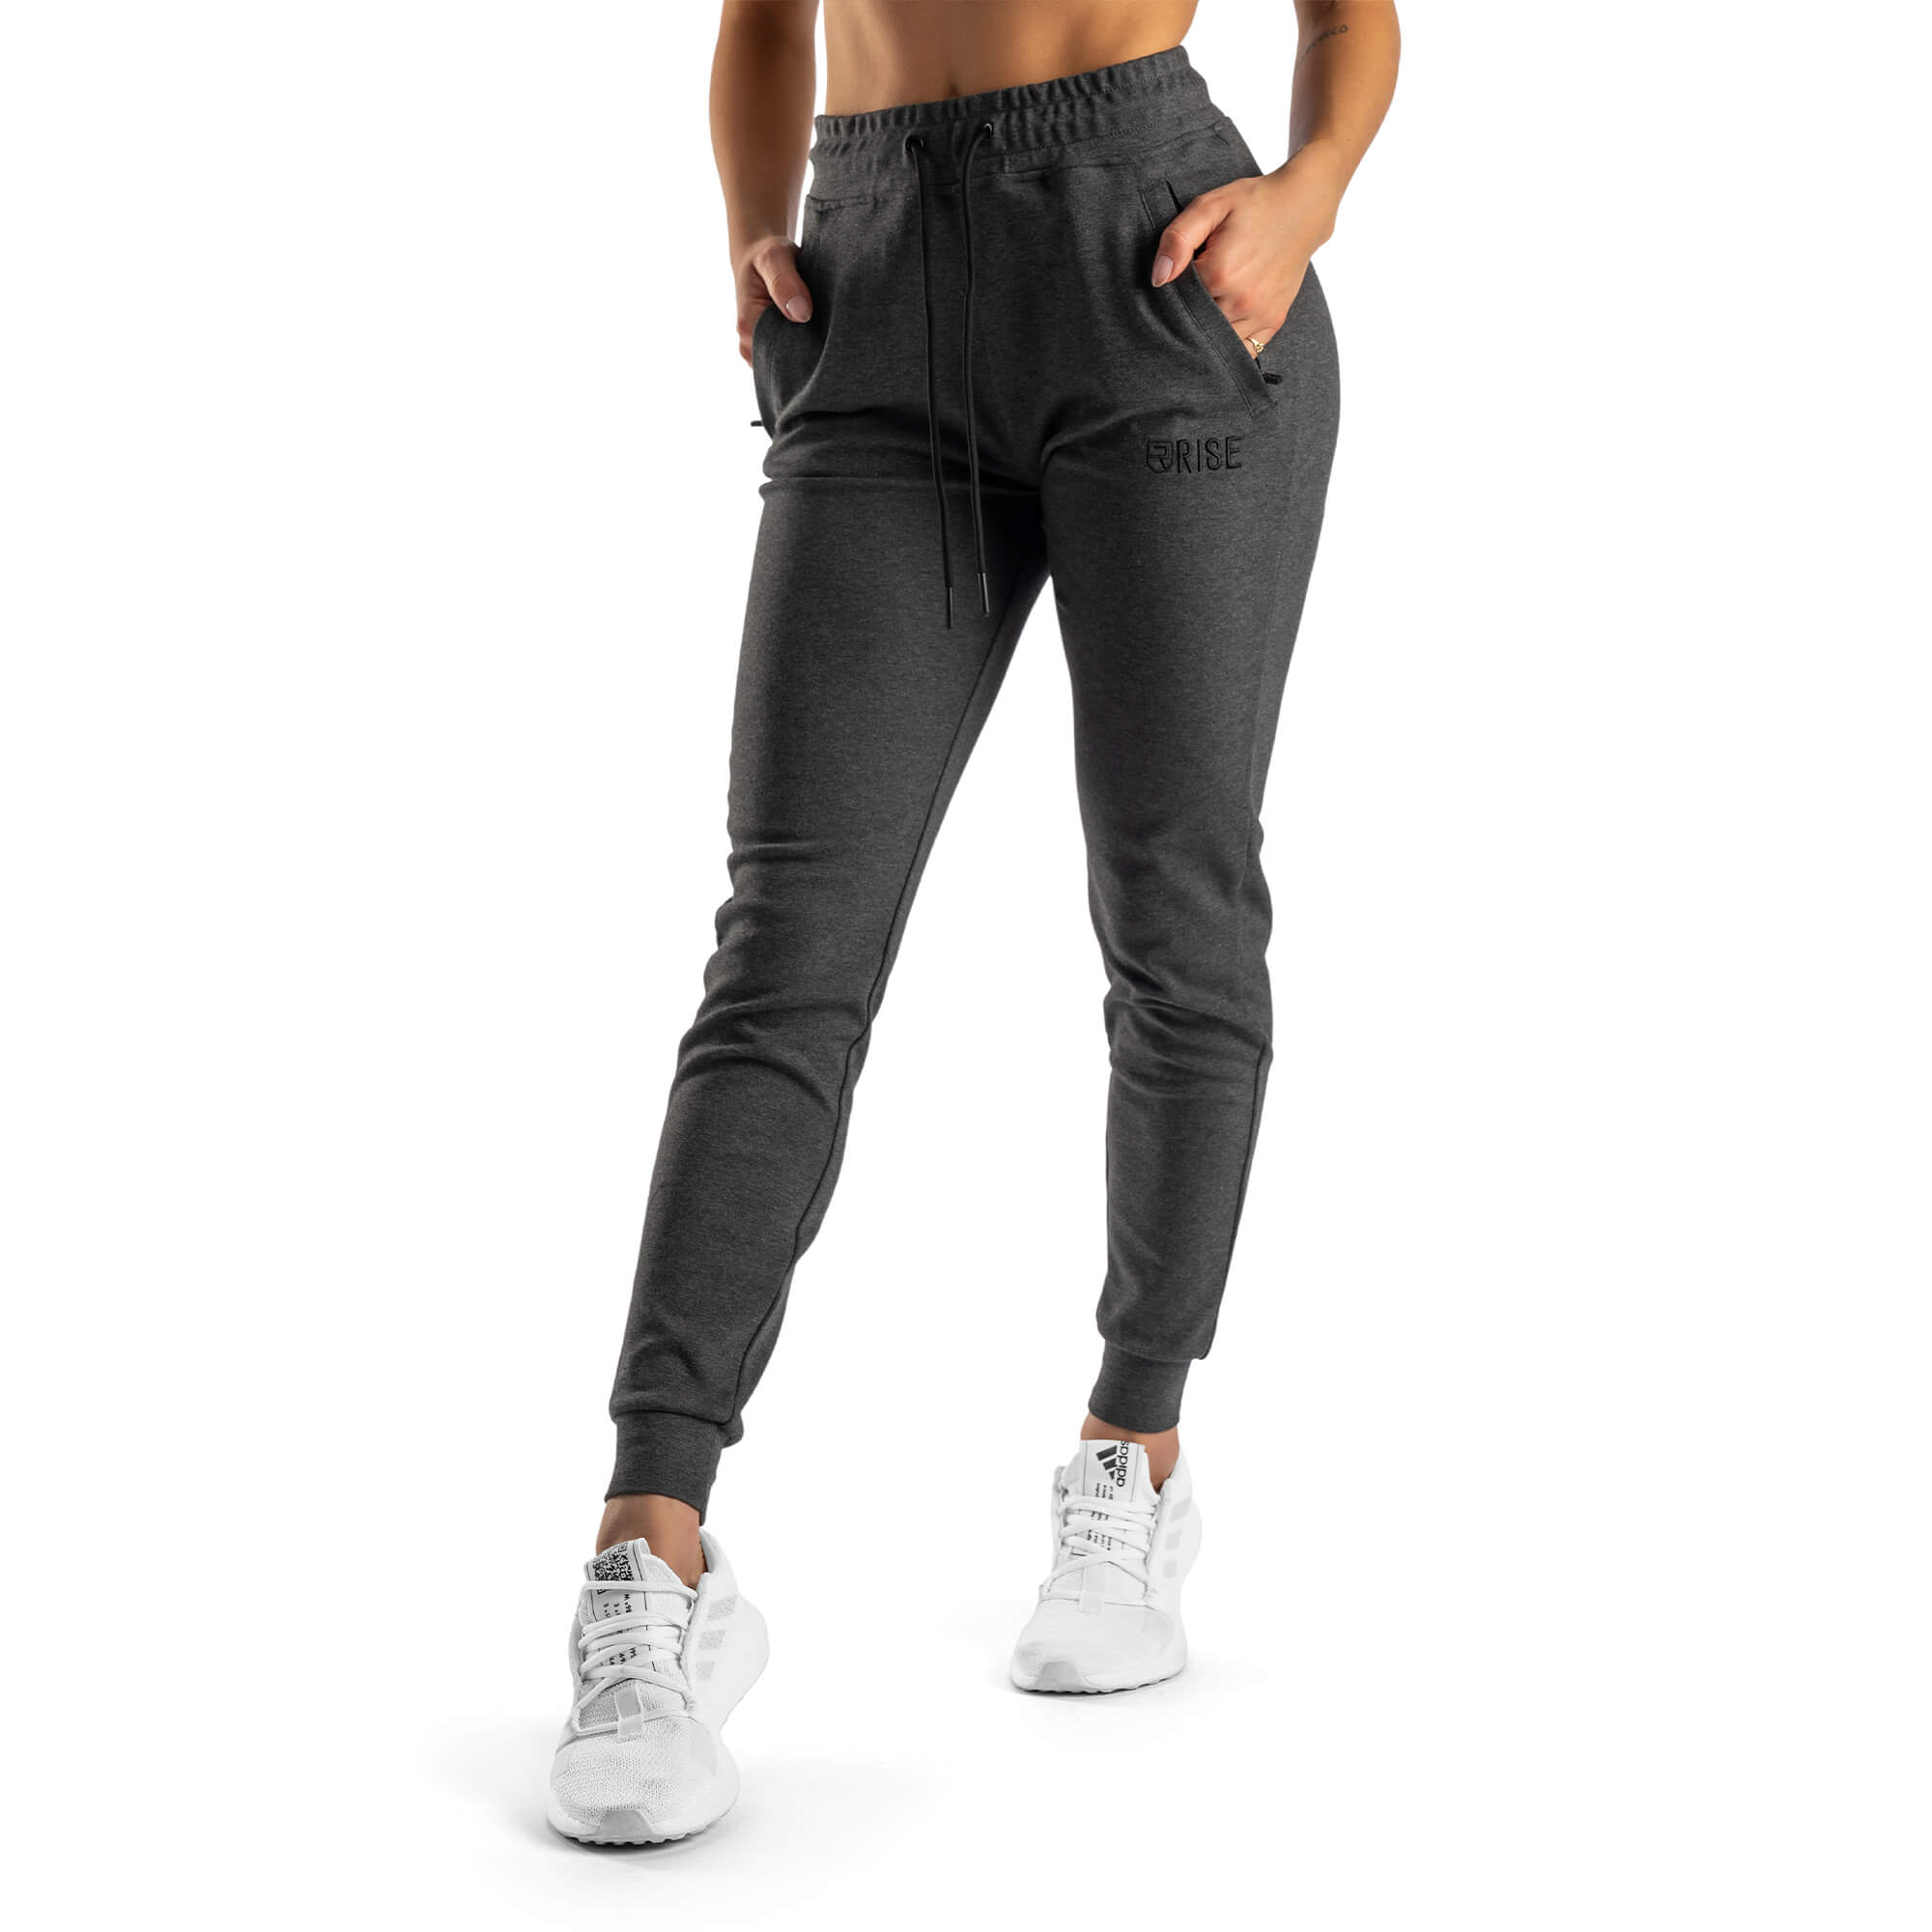 Athletic Bottoms - Charcoal